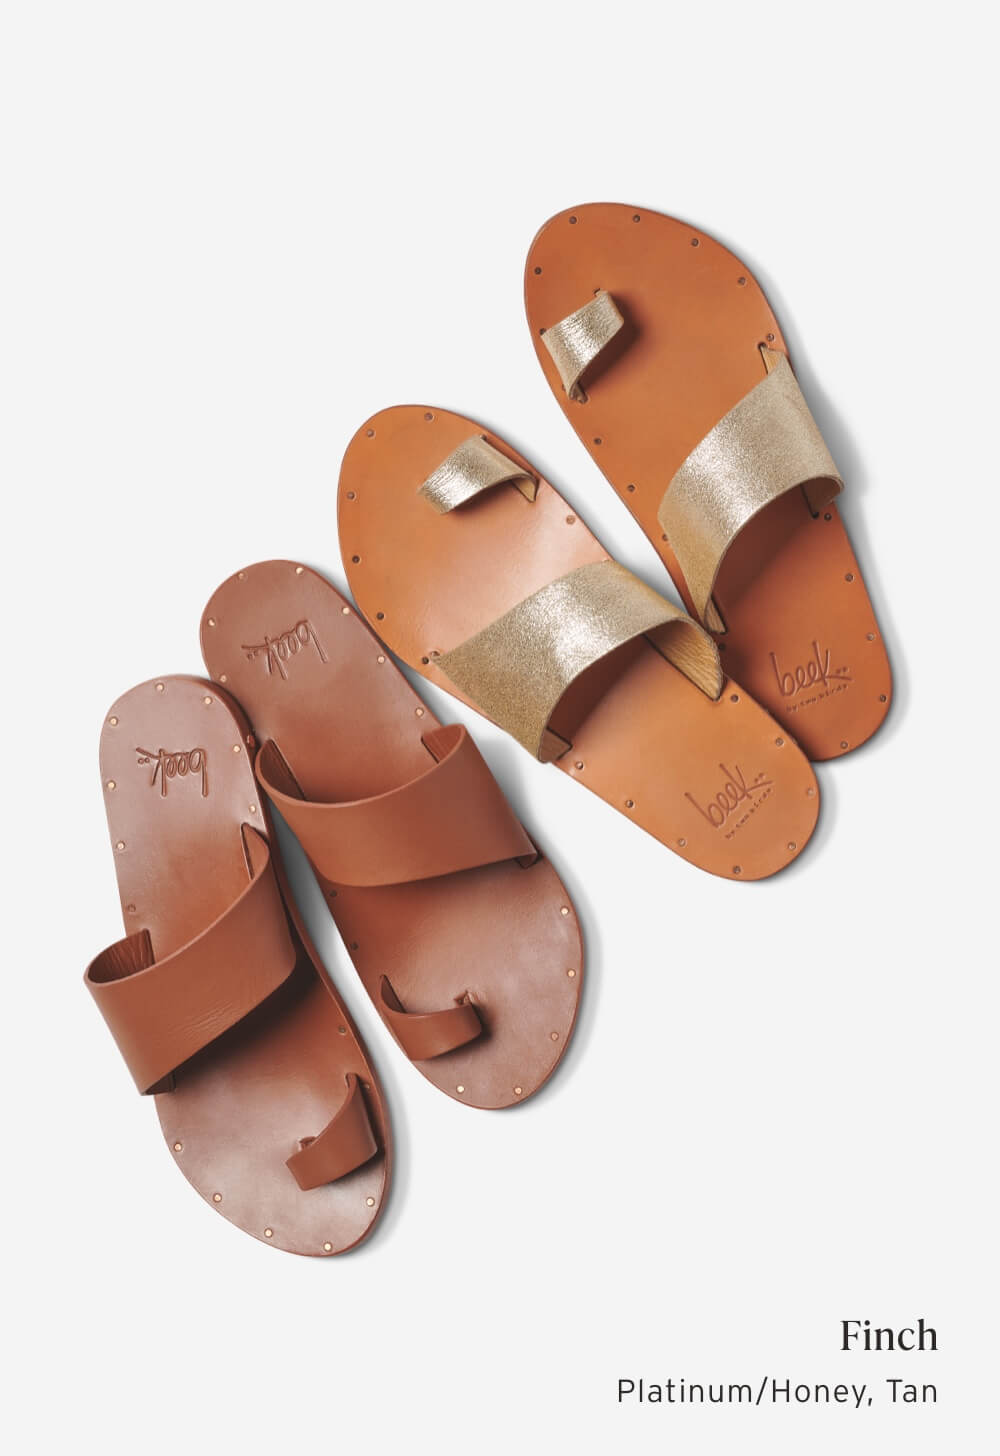 Finch leather toe ring sandals in platinum/honey and tan.